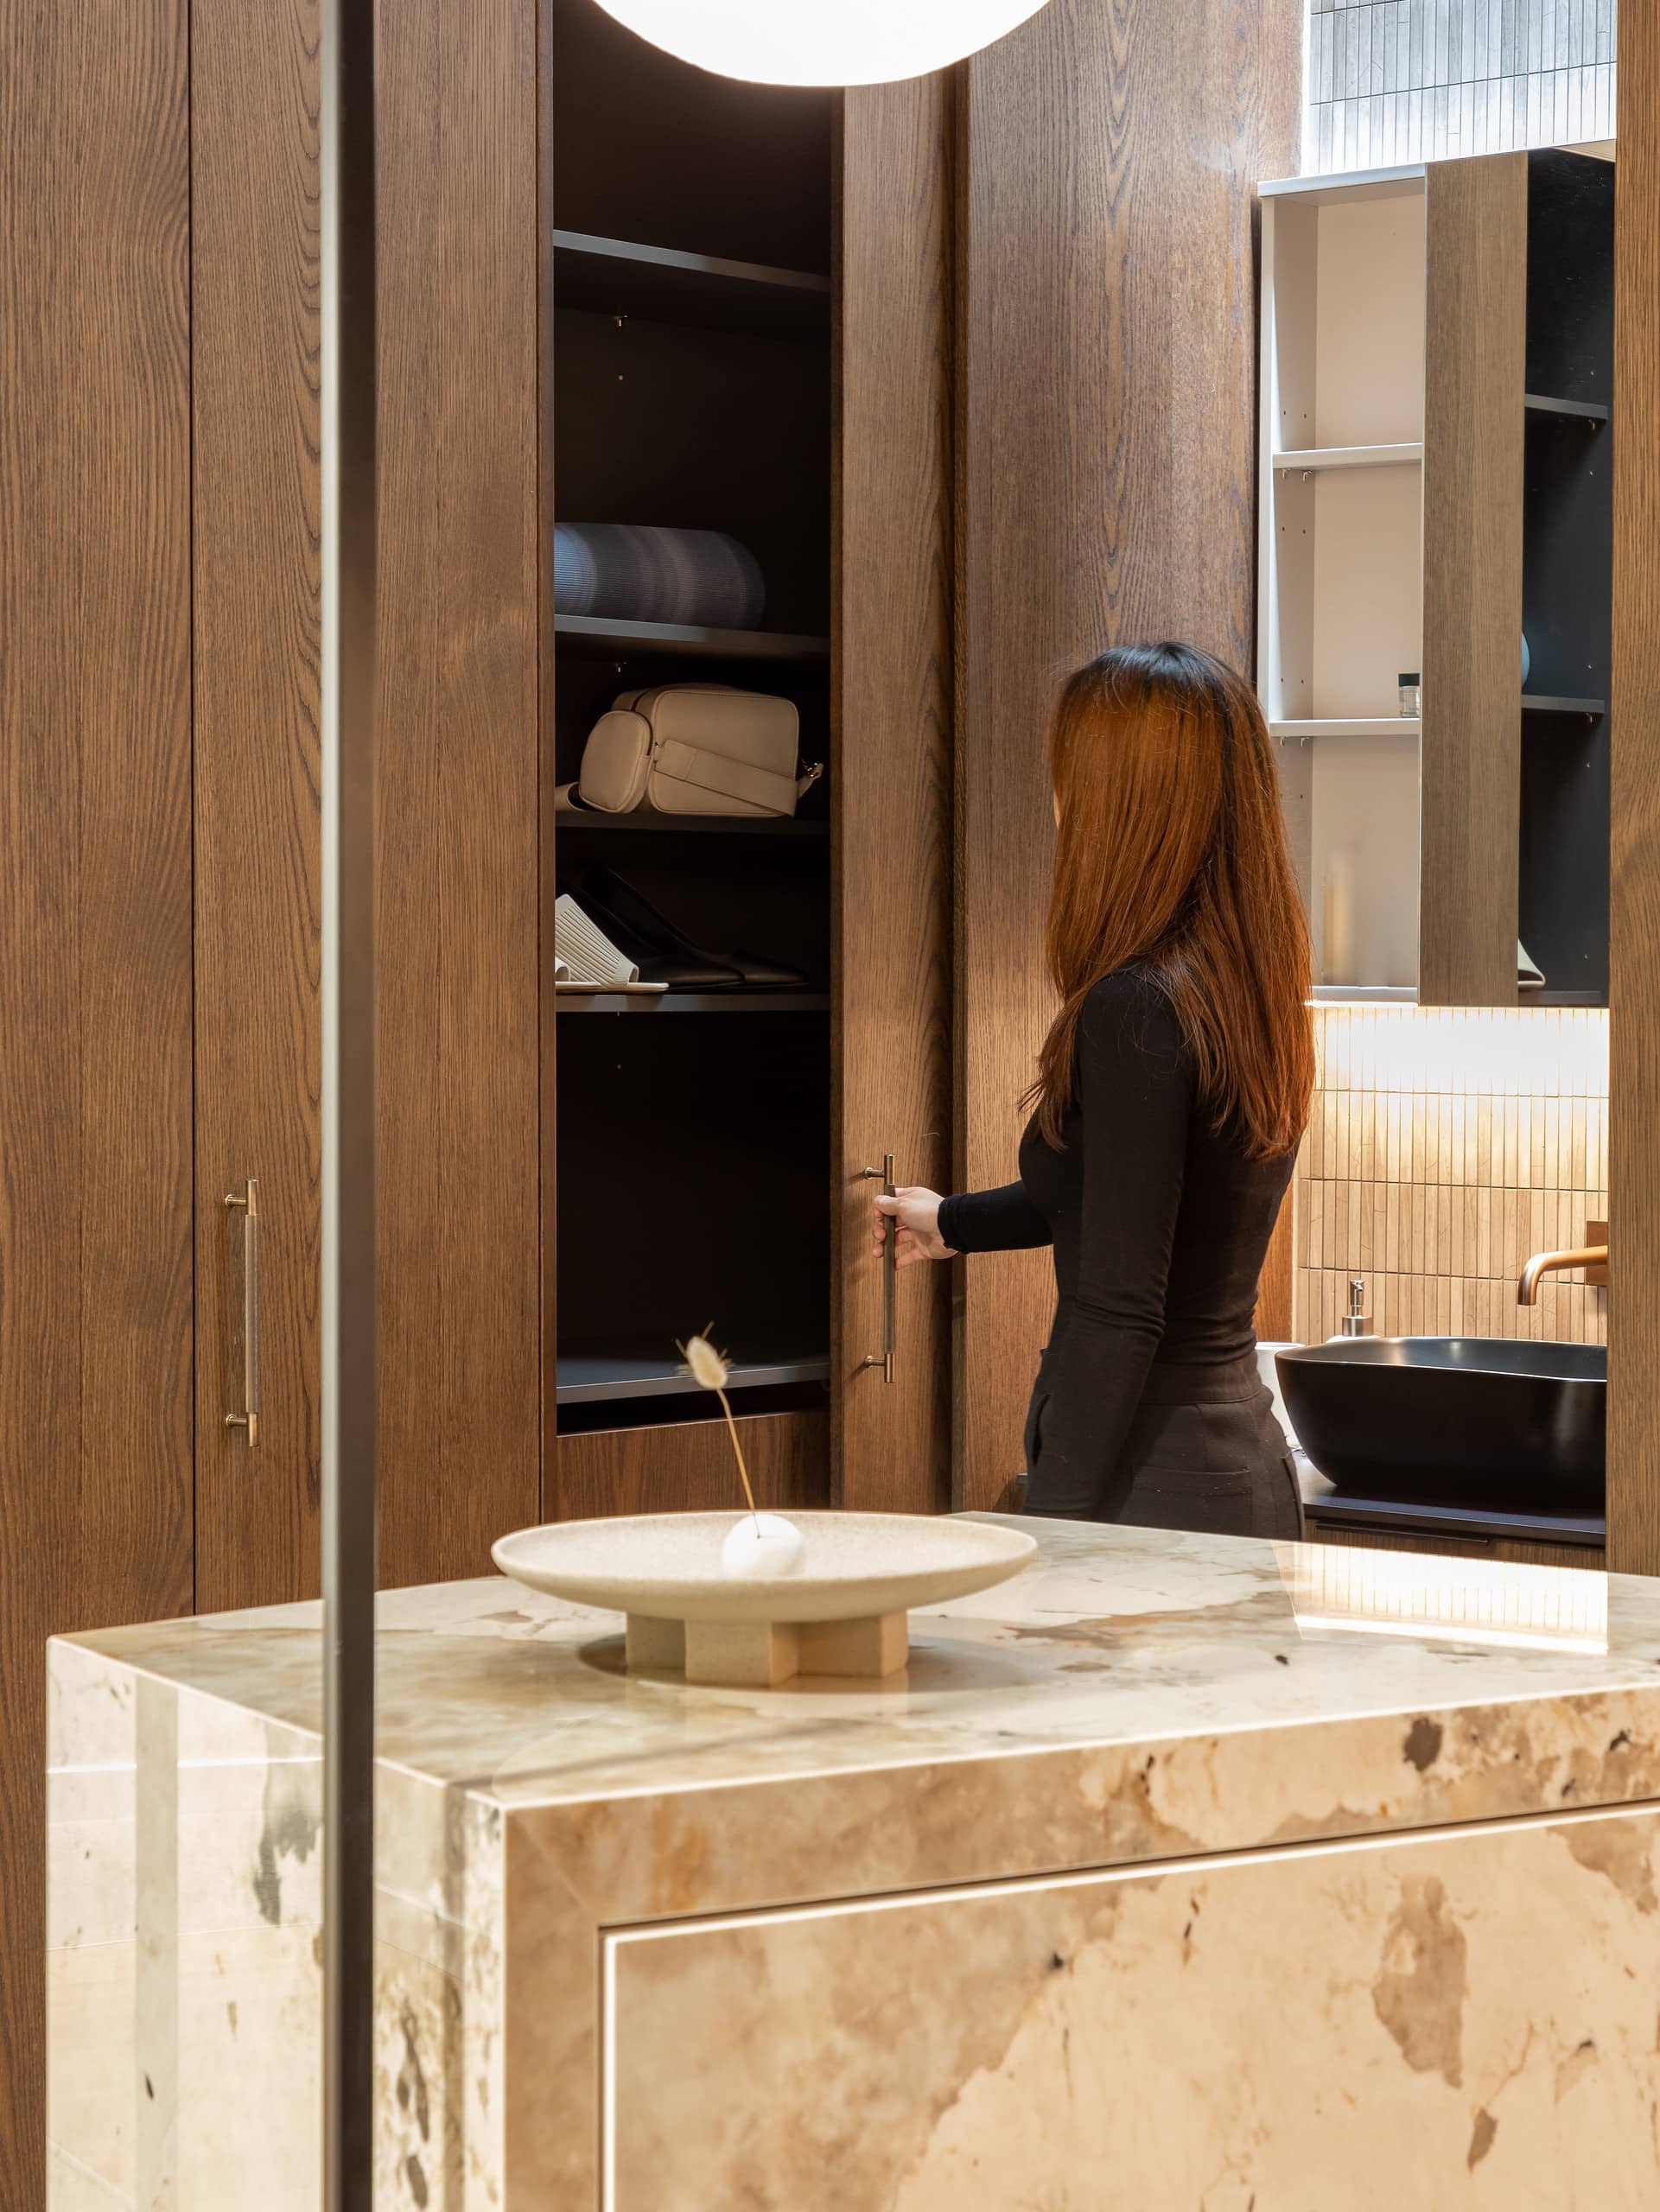 Luxury showroom with wooden sliding doors for a wardrobe and sliding mirrored bathroom